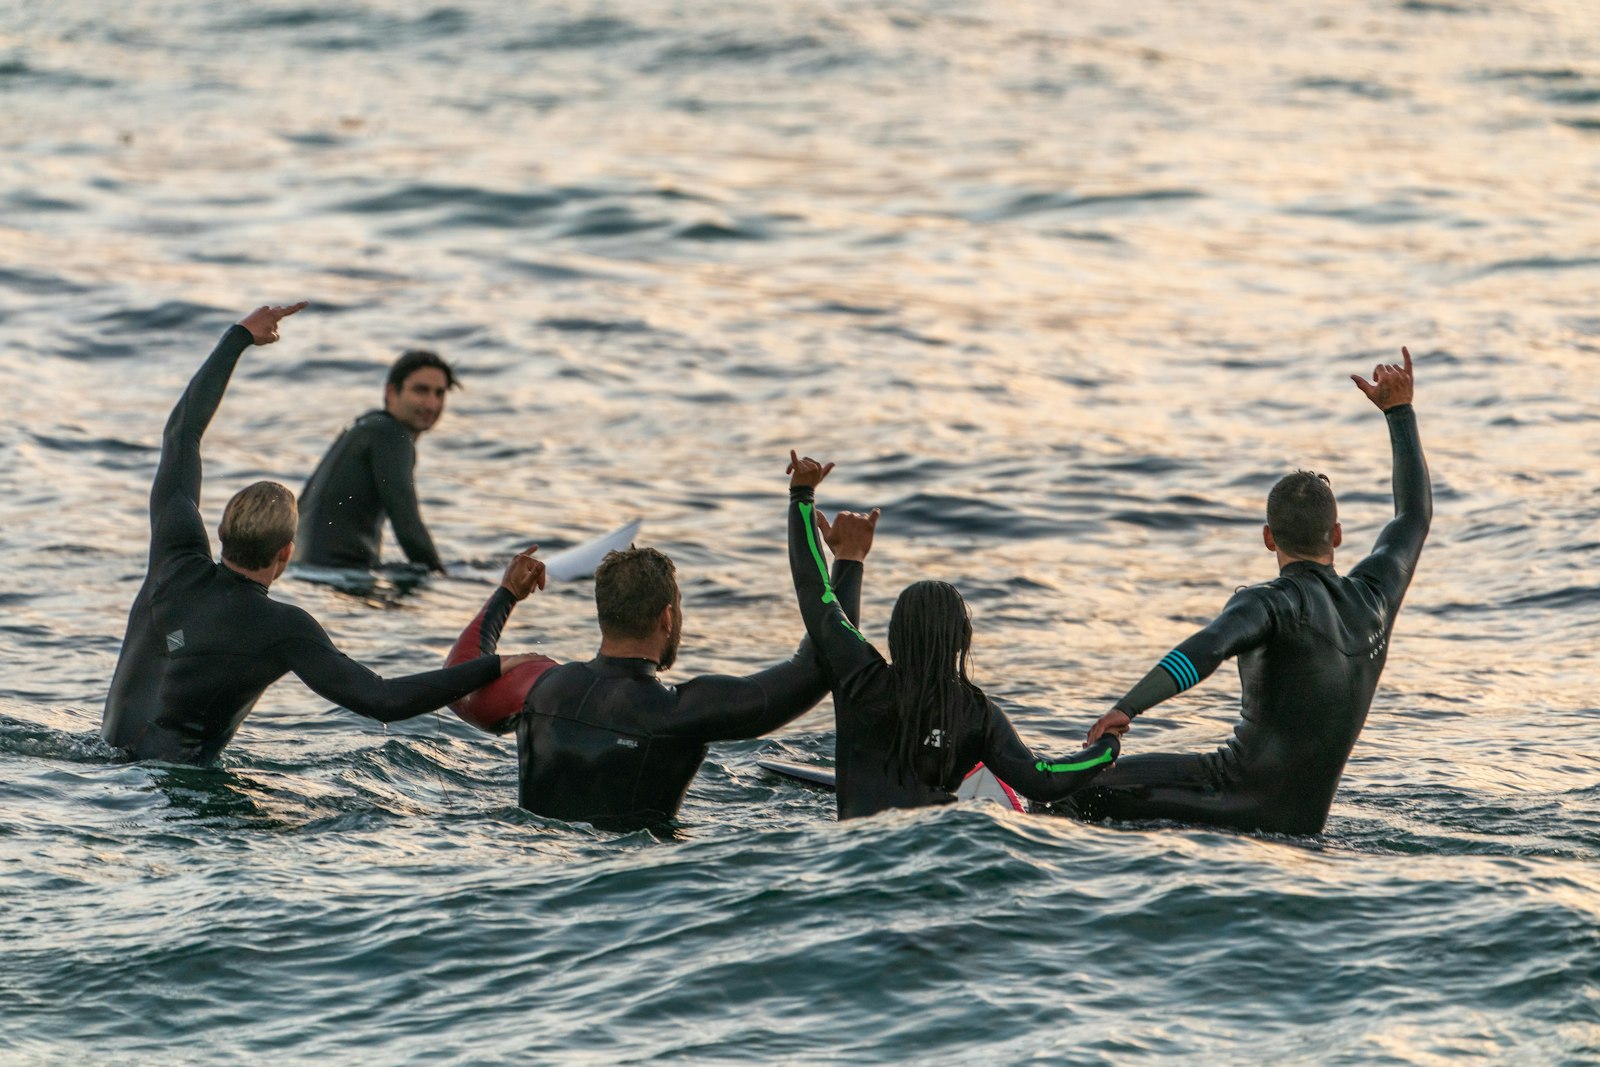 Sony a9 sample photo. People wearing black wetsuits photography